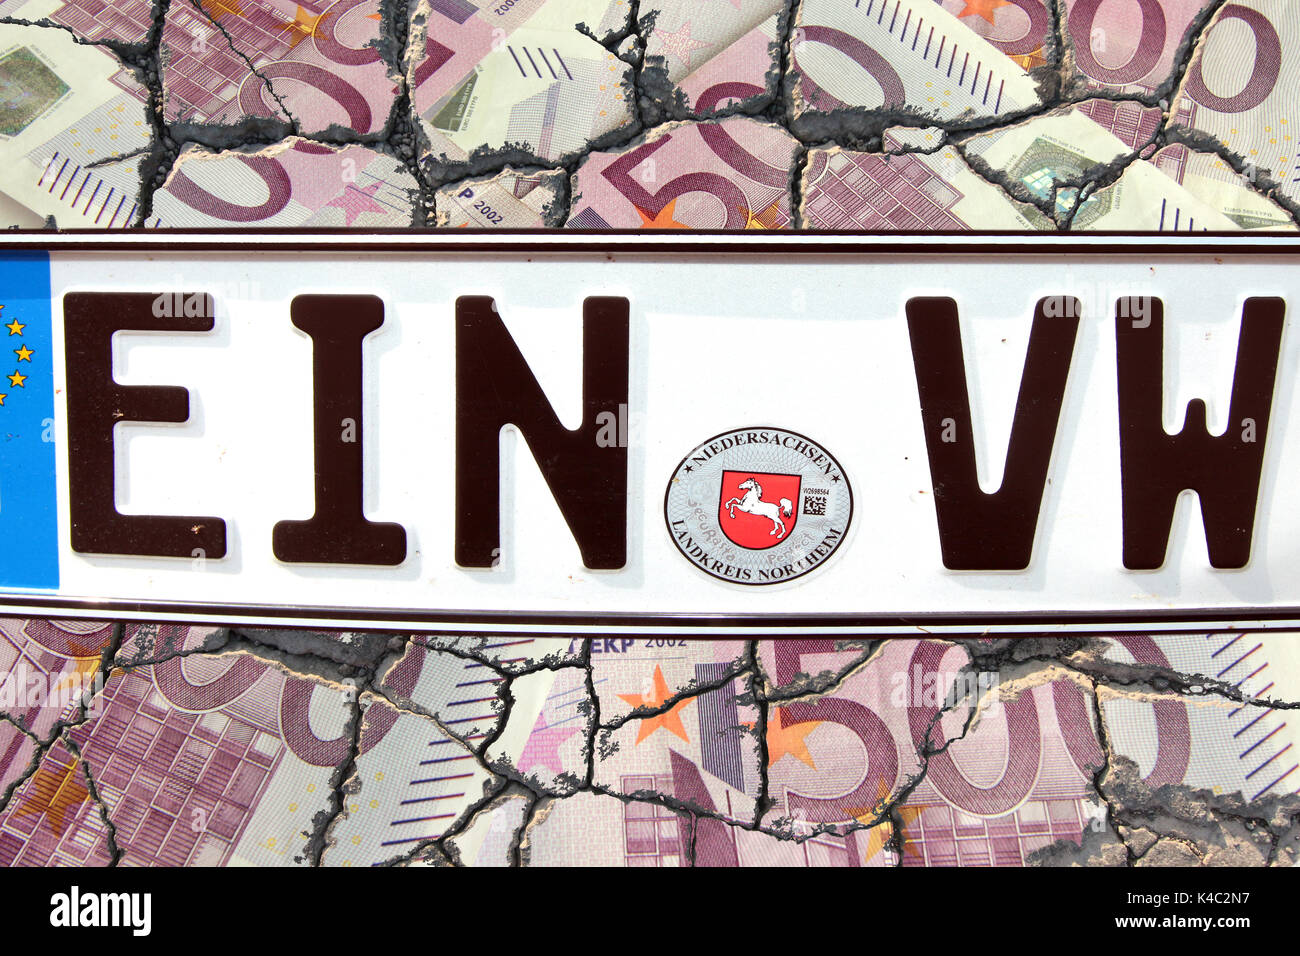 Licence Plate Of Einbeck Lower Saxony With Volkswagen Letters And Euro Banknotes Stock Photo